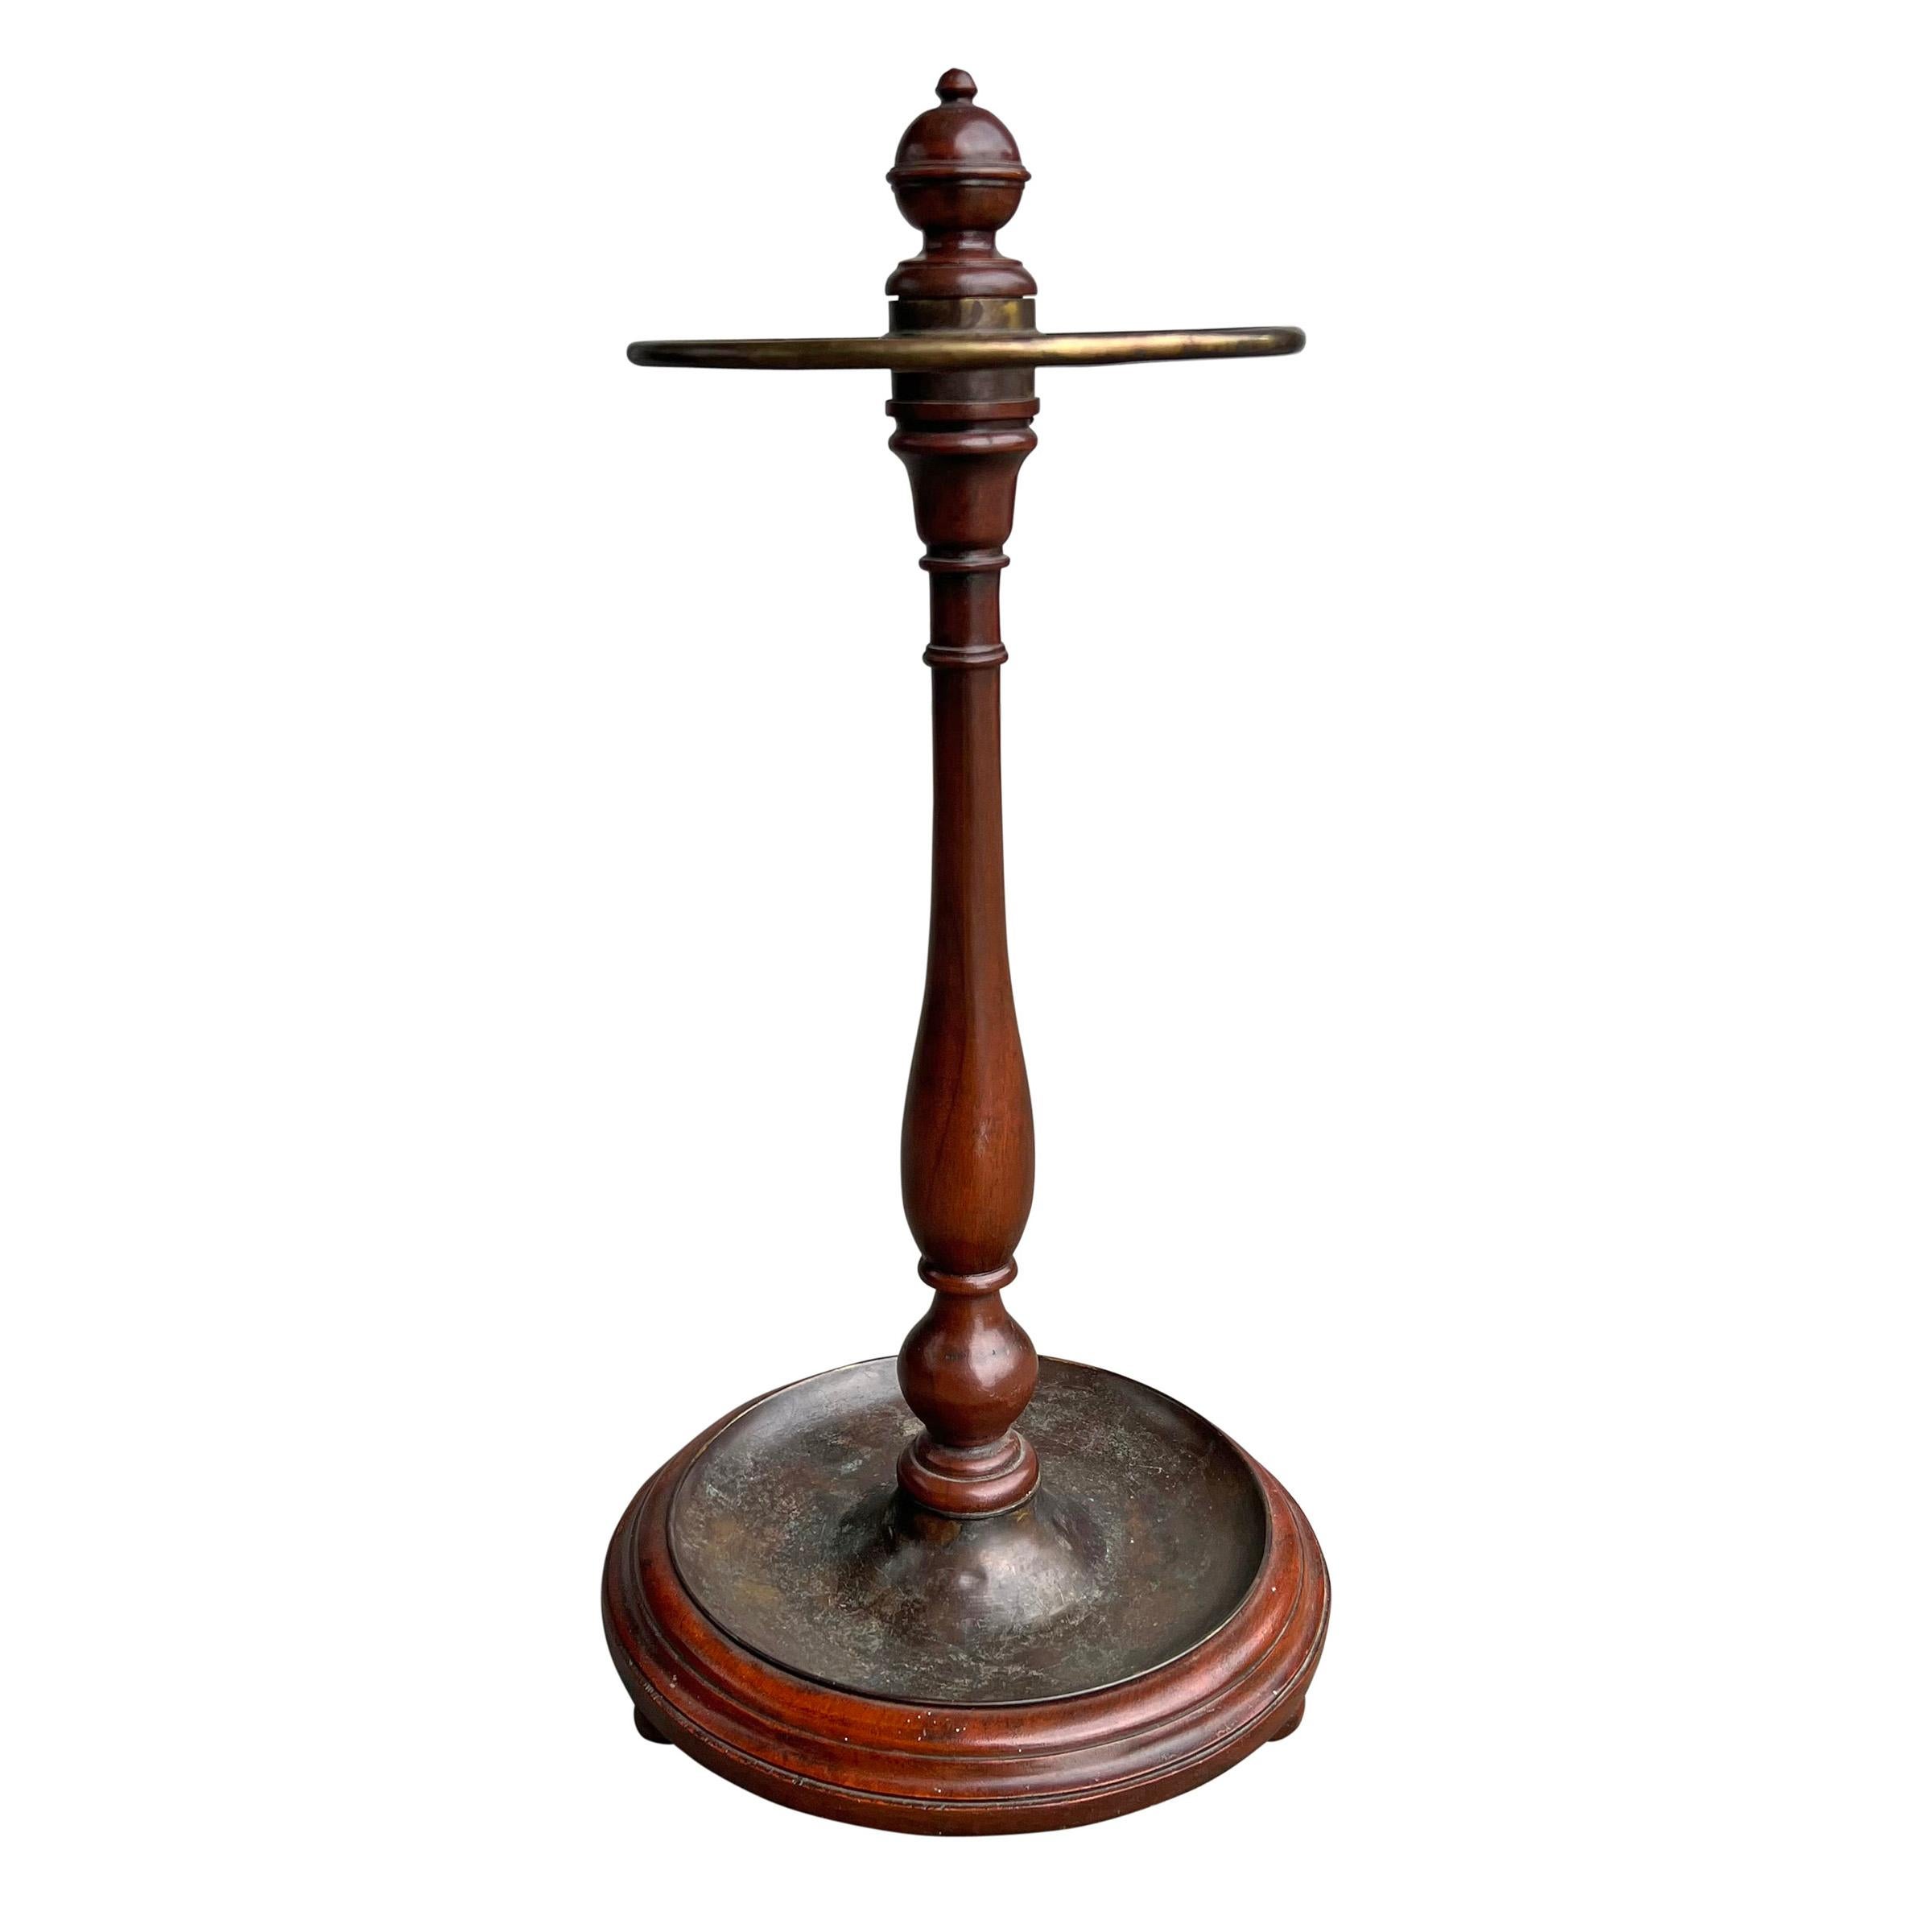 Edwardian Early 20th Century English Umbrella Stand For Sale